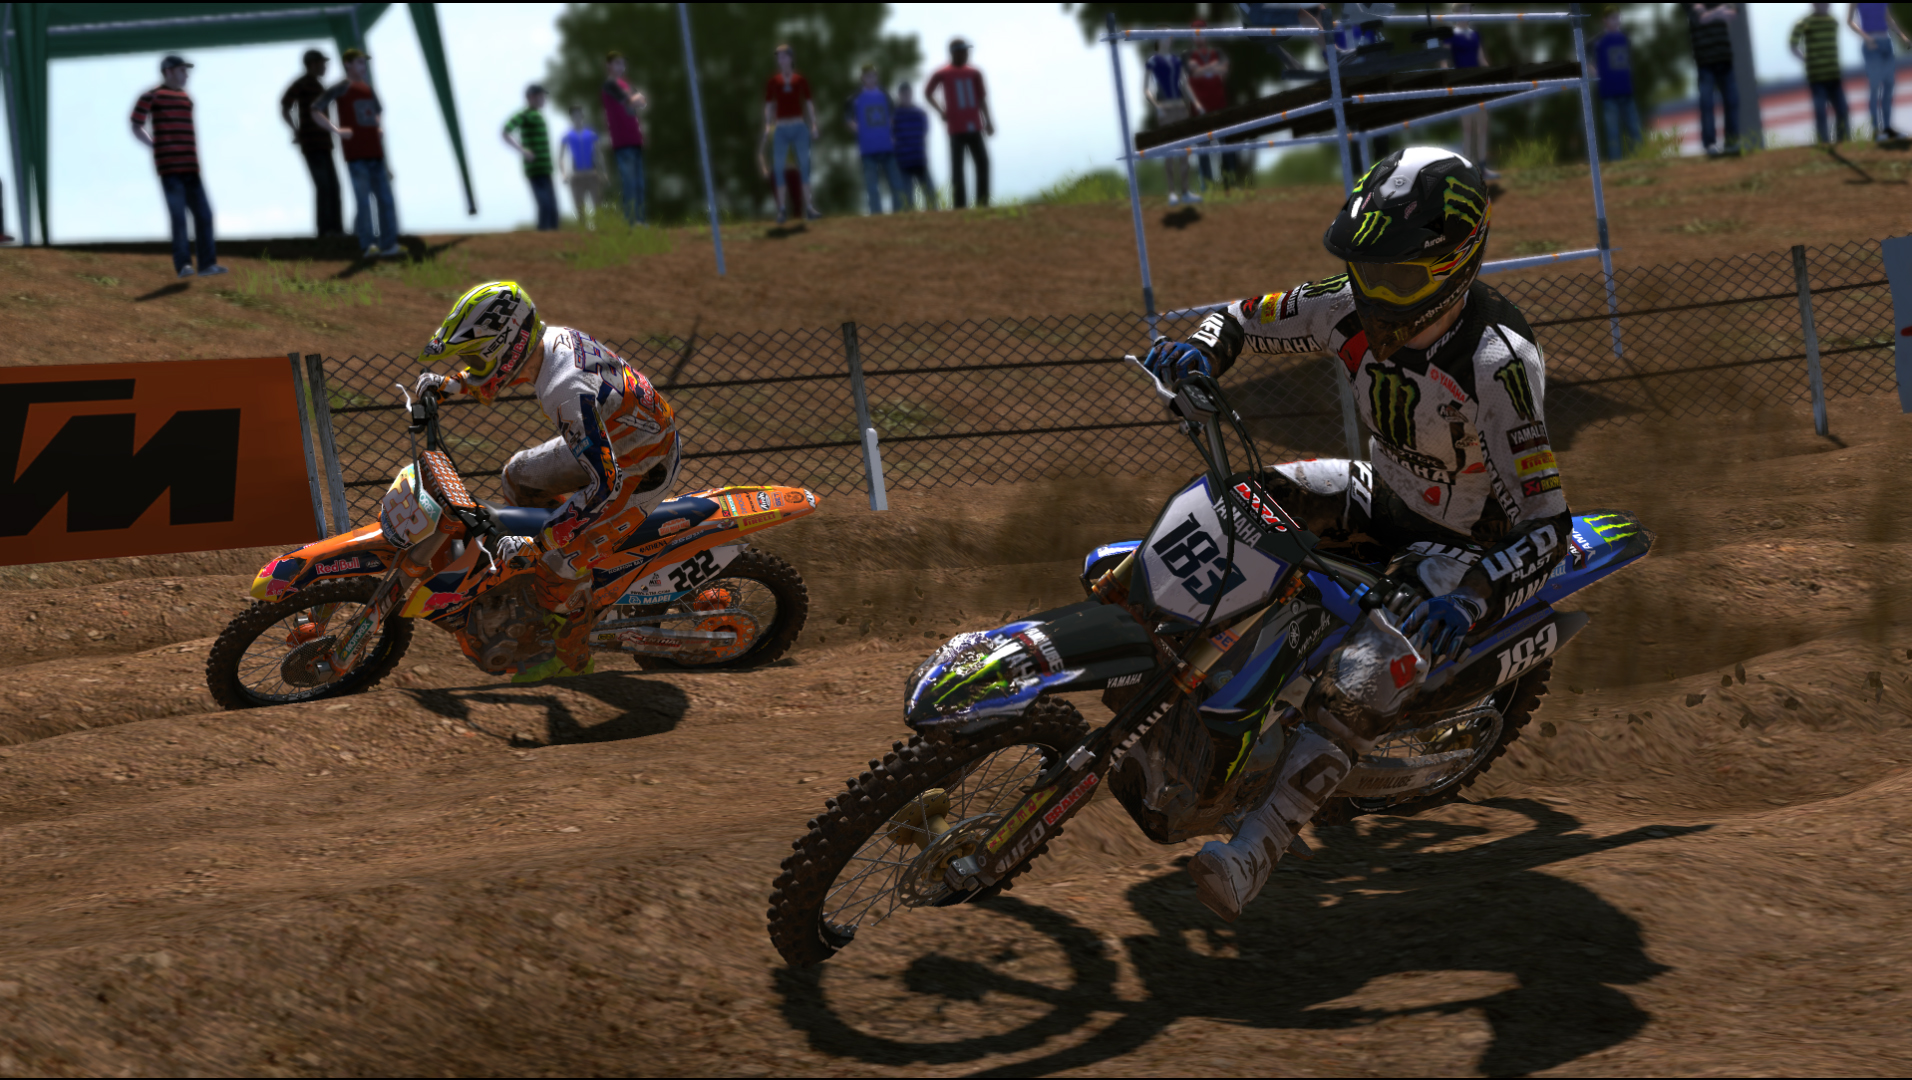 Mxgp The Official Motocross Videogame On Steam